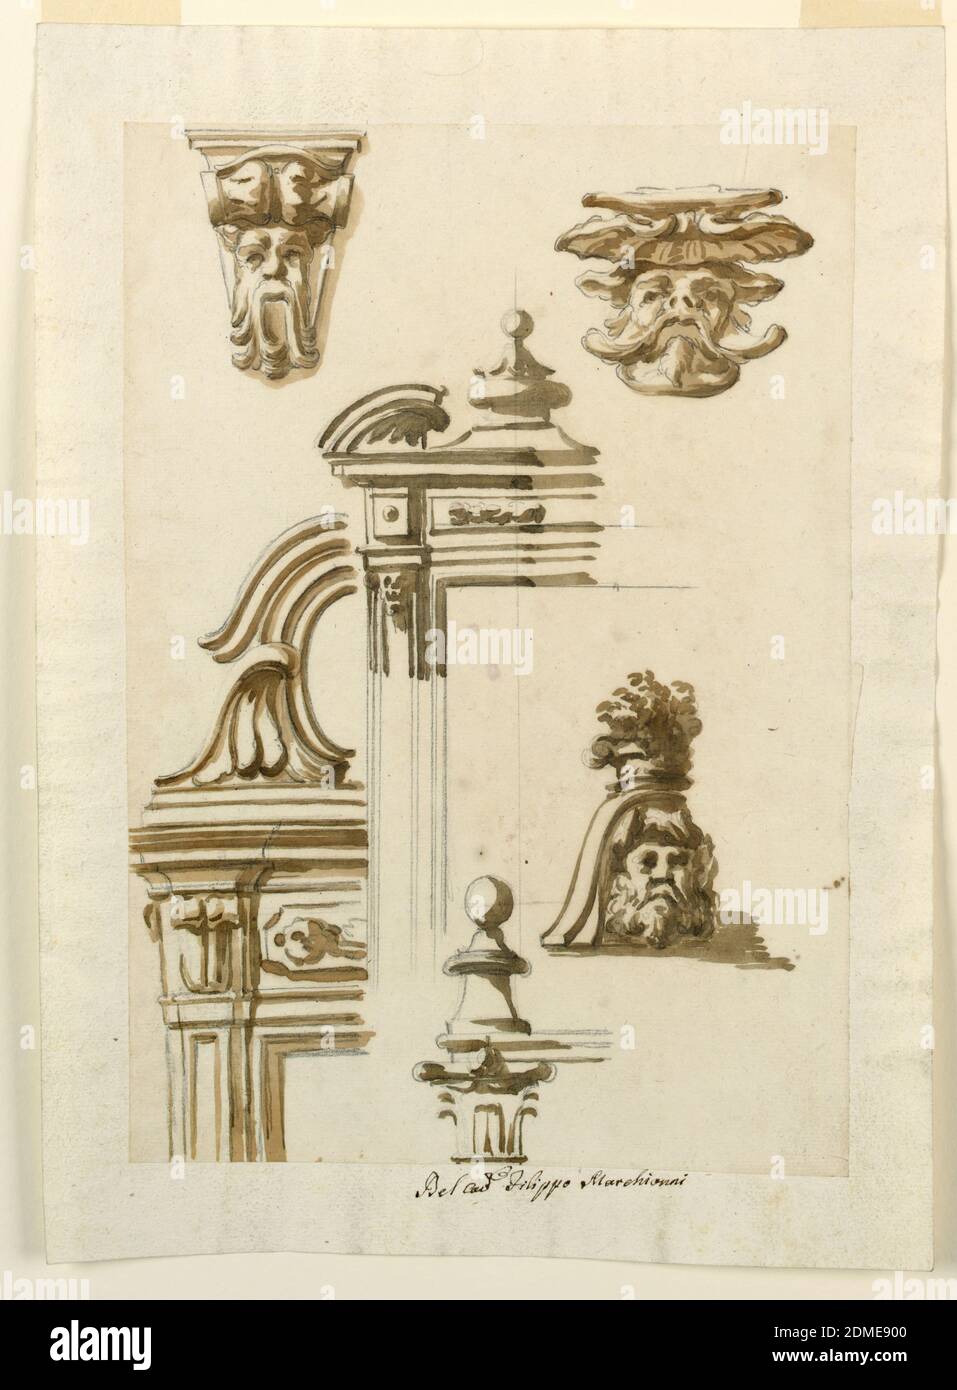 Architectural Studies, Filippo Marchionni, Italian, 1732–1805, Charcoal, brush and sepia, black-brown watercolor on laid paper, Left row: a console with a mask; upper part of door case, laterally framed by a pilaster. A decorated panel is in the frieze above the opening. On top is an oblong framed by scrolls and halves of palmettes. Central row: upper left side of a door or window case, showing a broken pediment with a knob motif in the center. A capital supports cornices and a knob. Right row: two masks, the upper one supporting a shell, the lower one a vase with twigs., Italy, 1750–90 Stock Photo